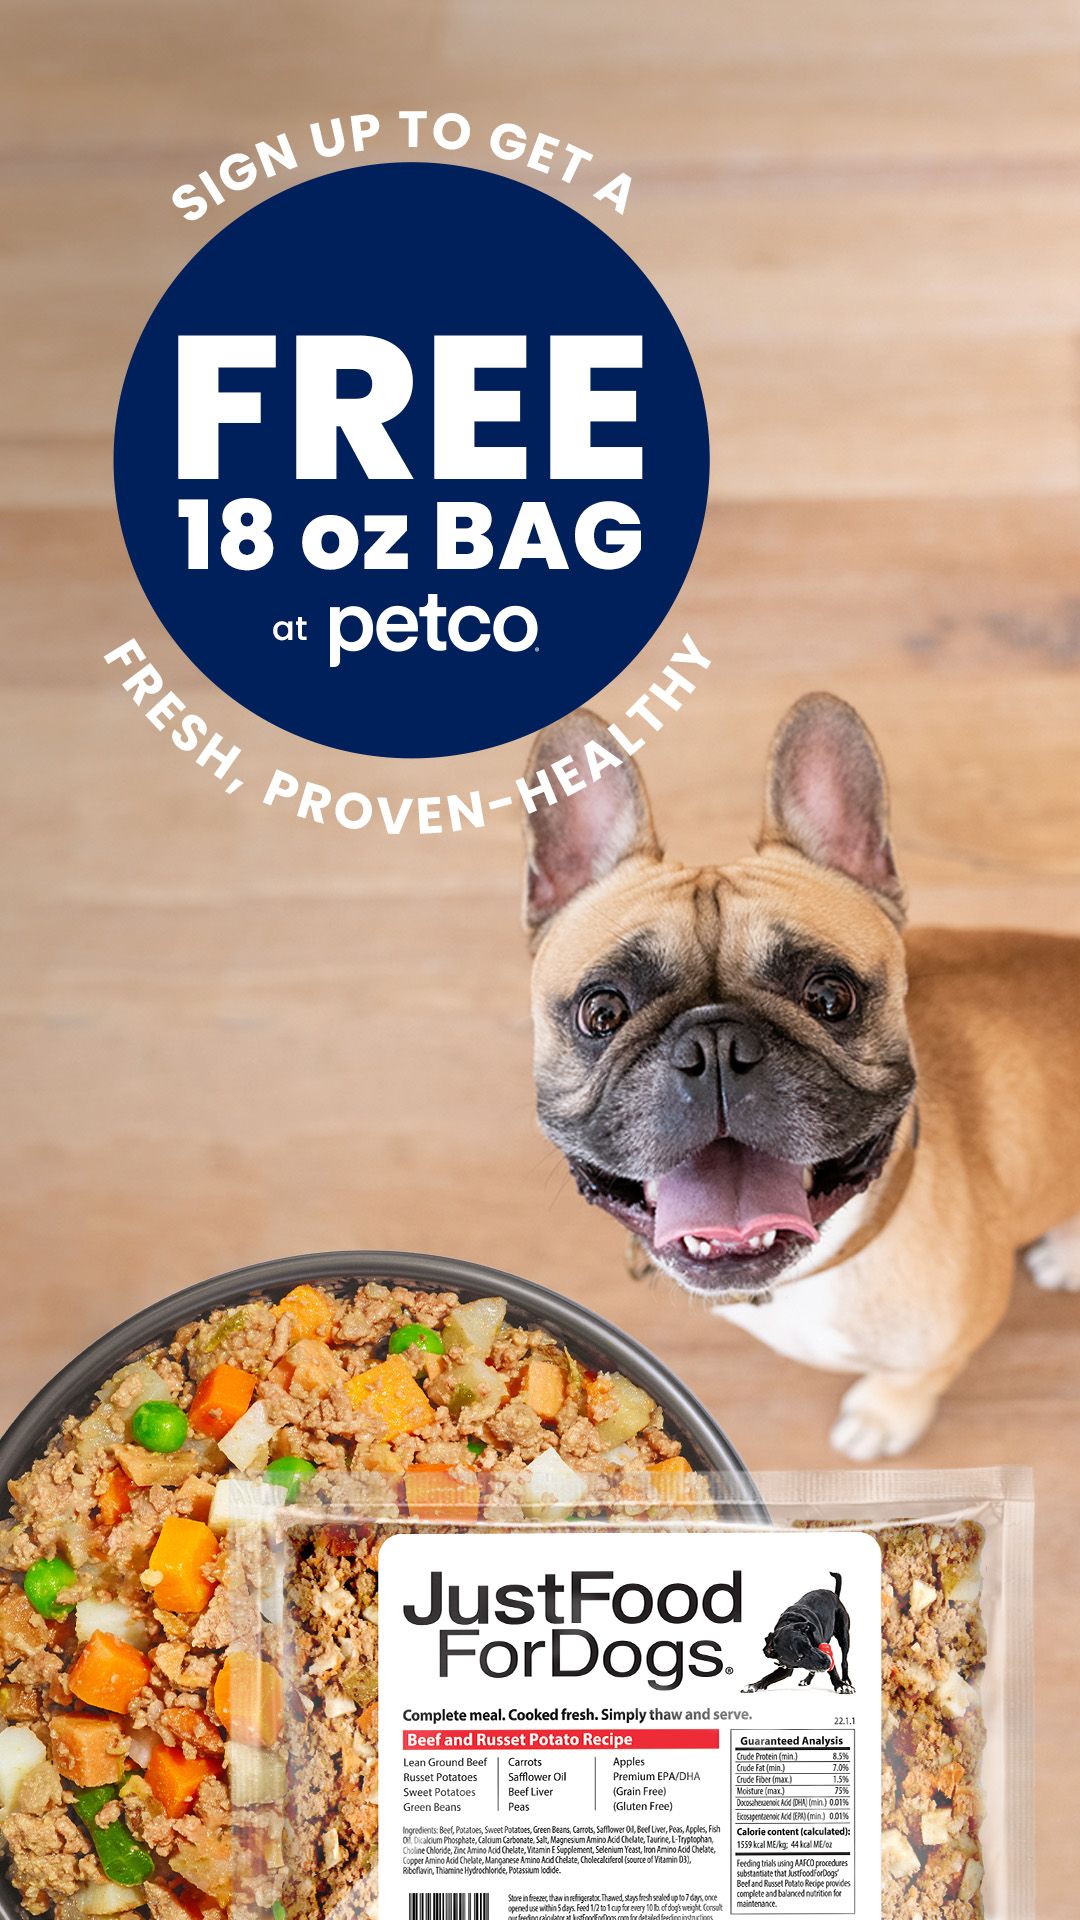 Free 18 oz bag of Just Food For Dogs after rebate from Aisle- Valid only at Petco In-Store